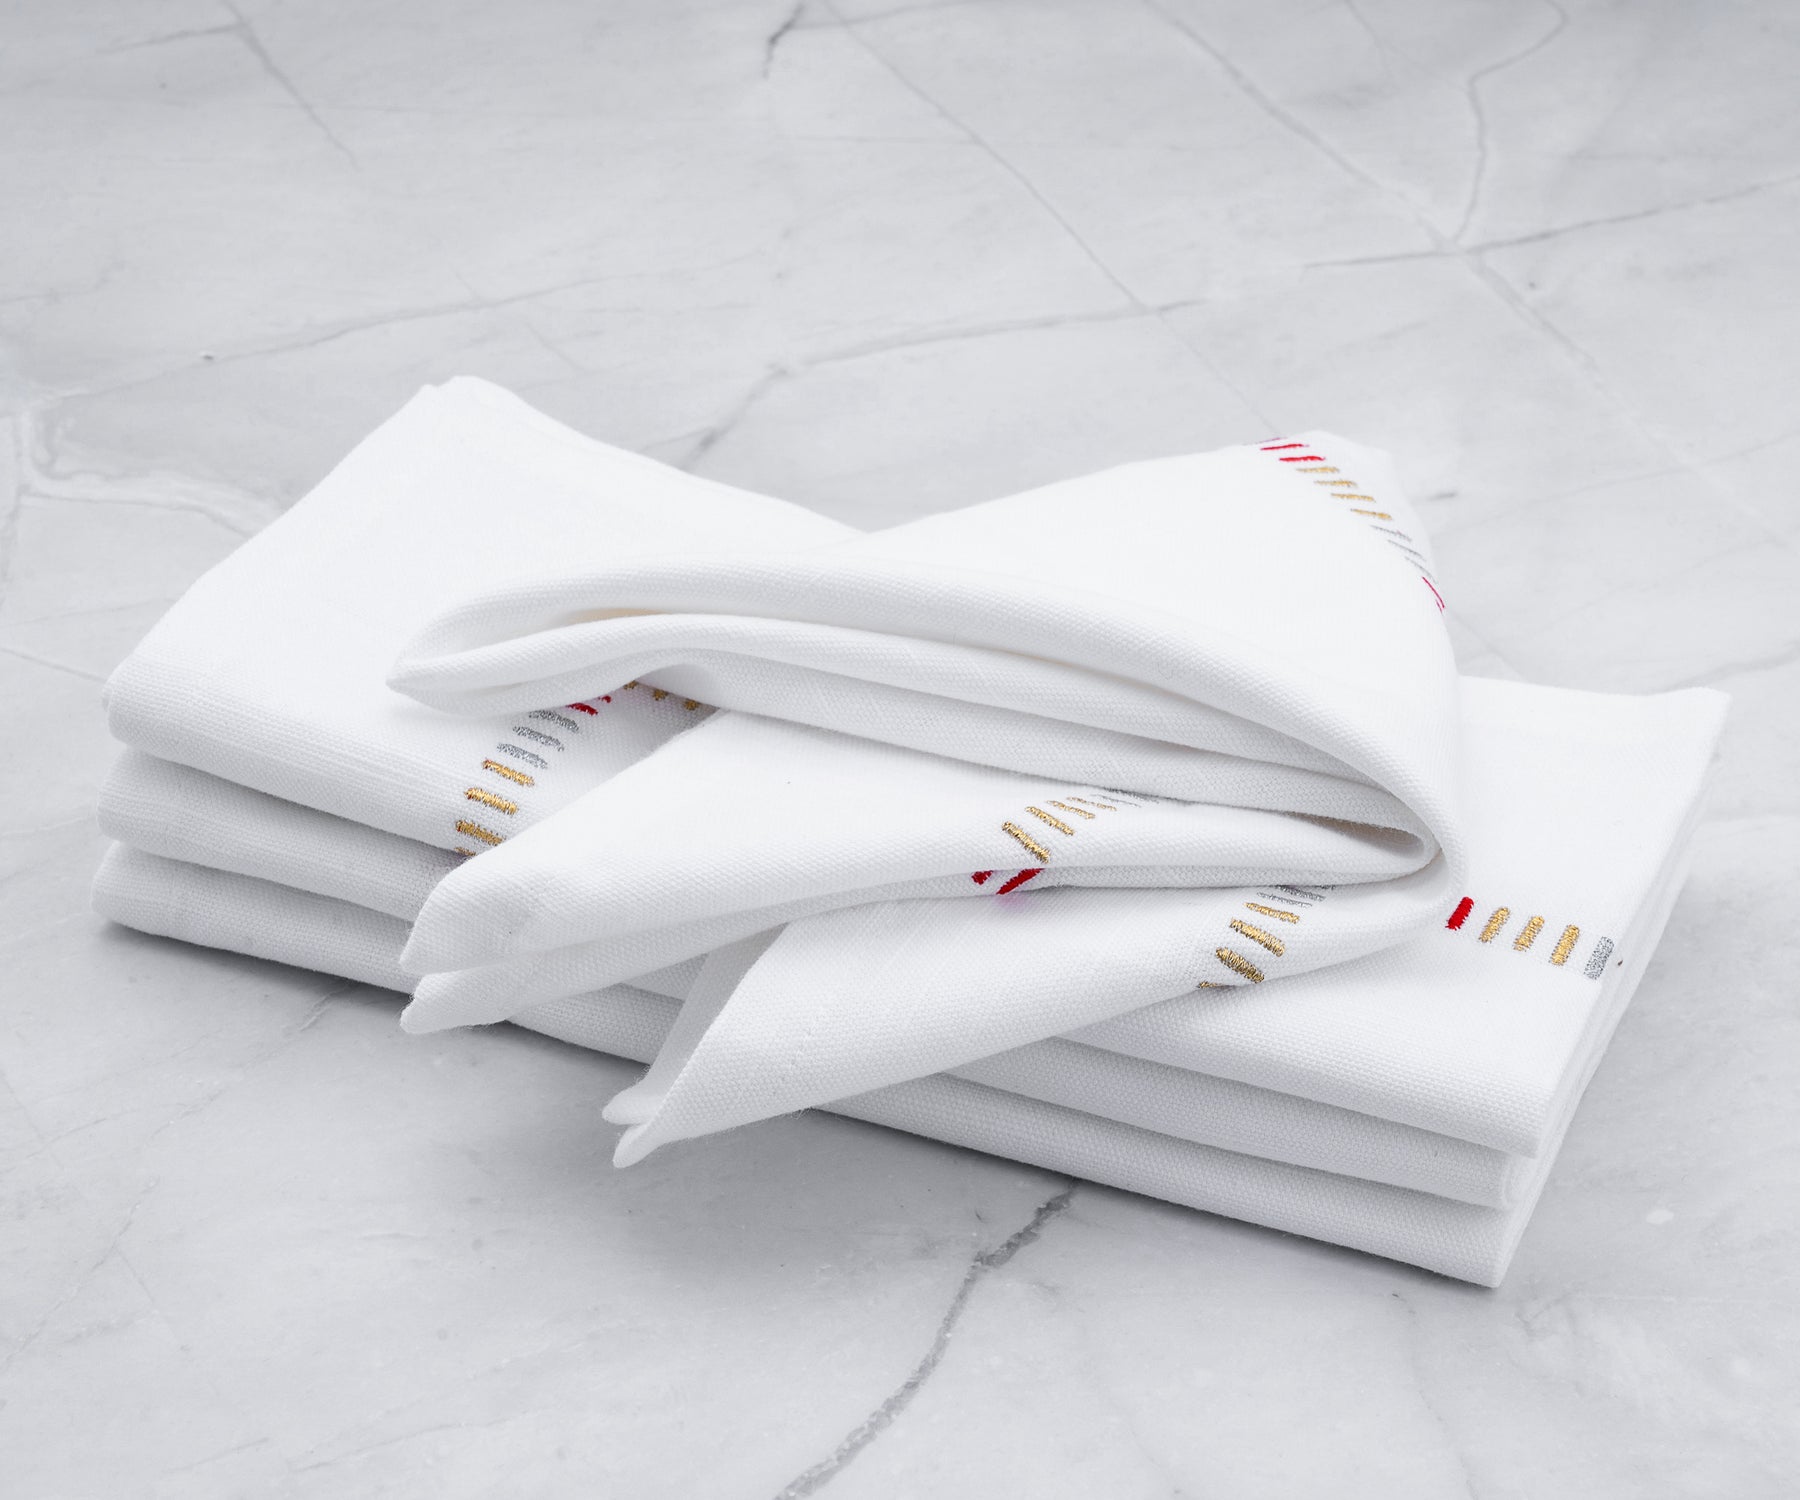  Harmonie napkins for a balanced and elegant touch 